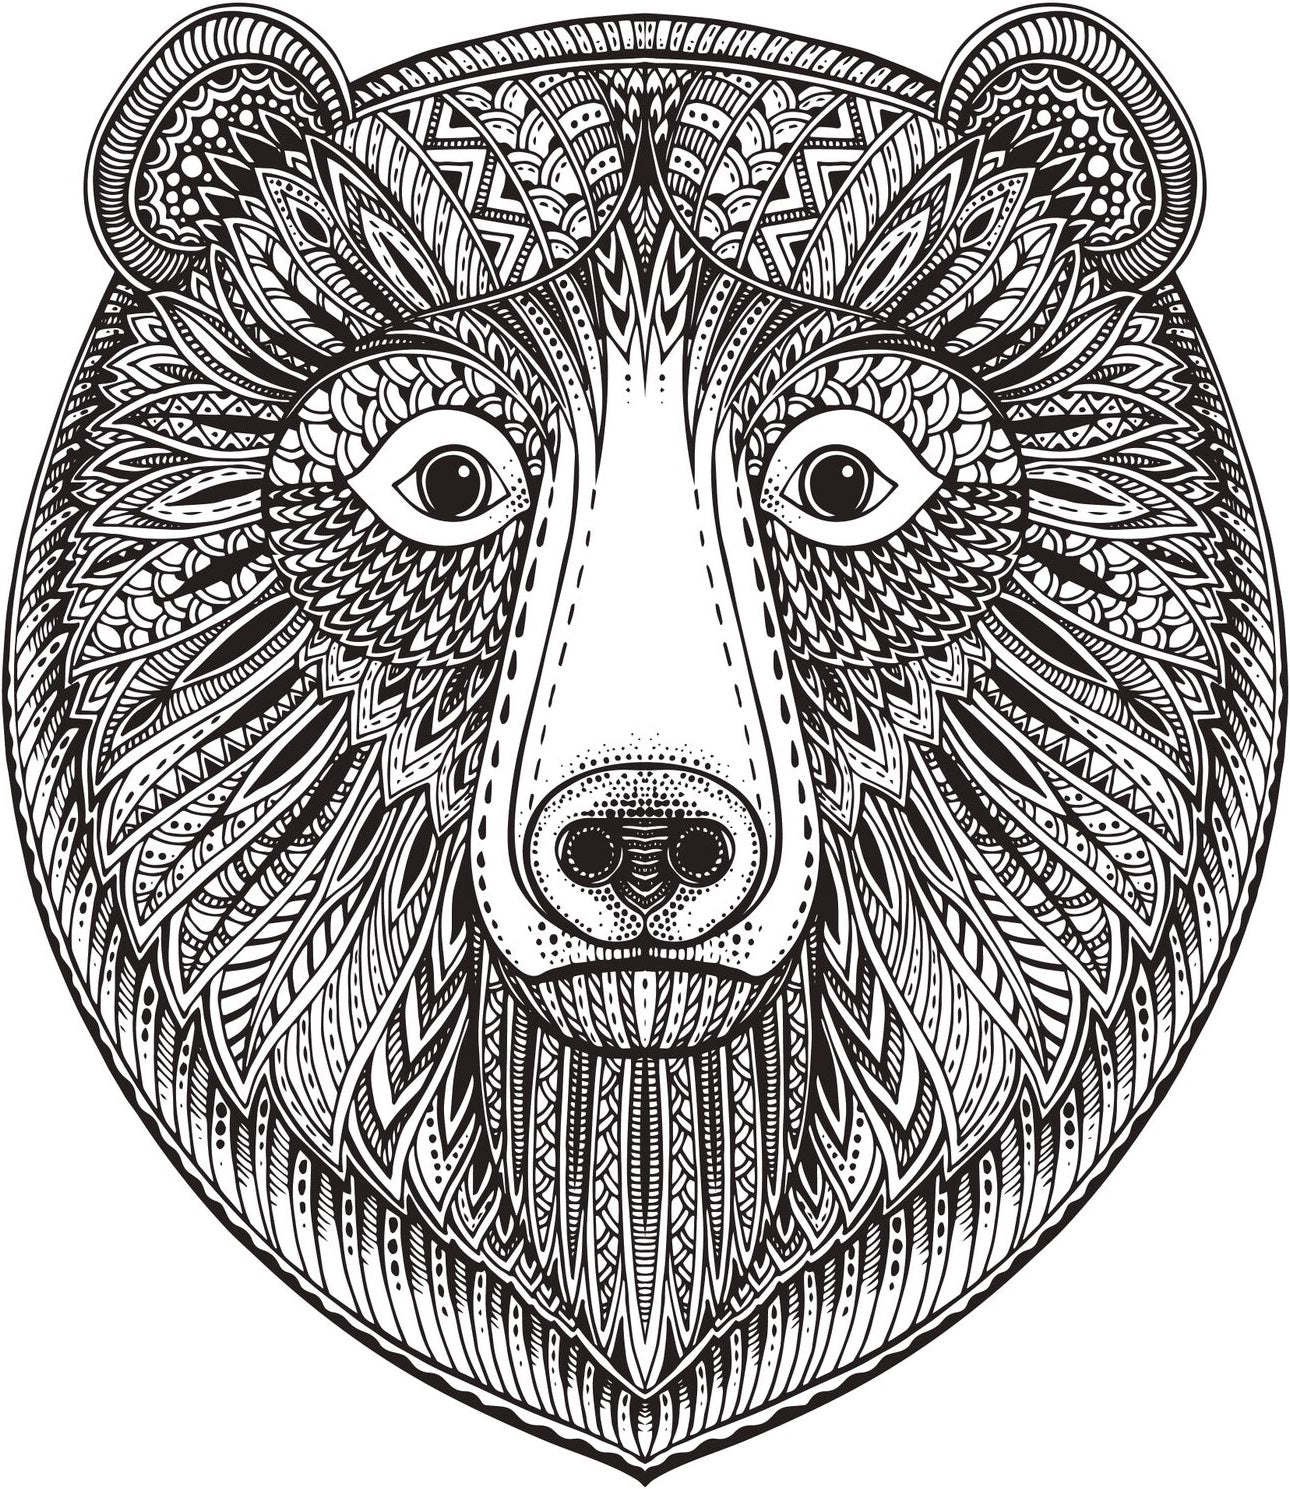 Friendly Bear with Patterned Fur Vinyl Decal Sticker